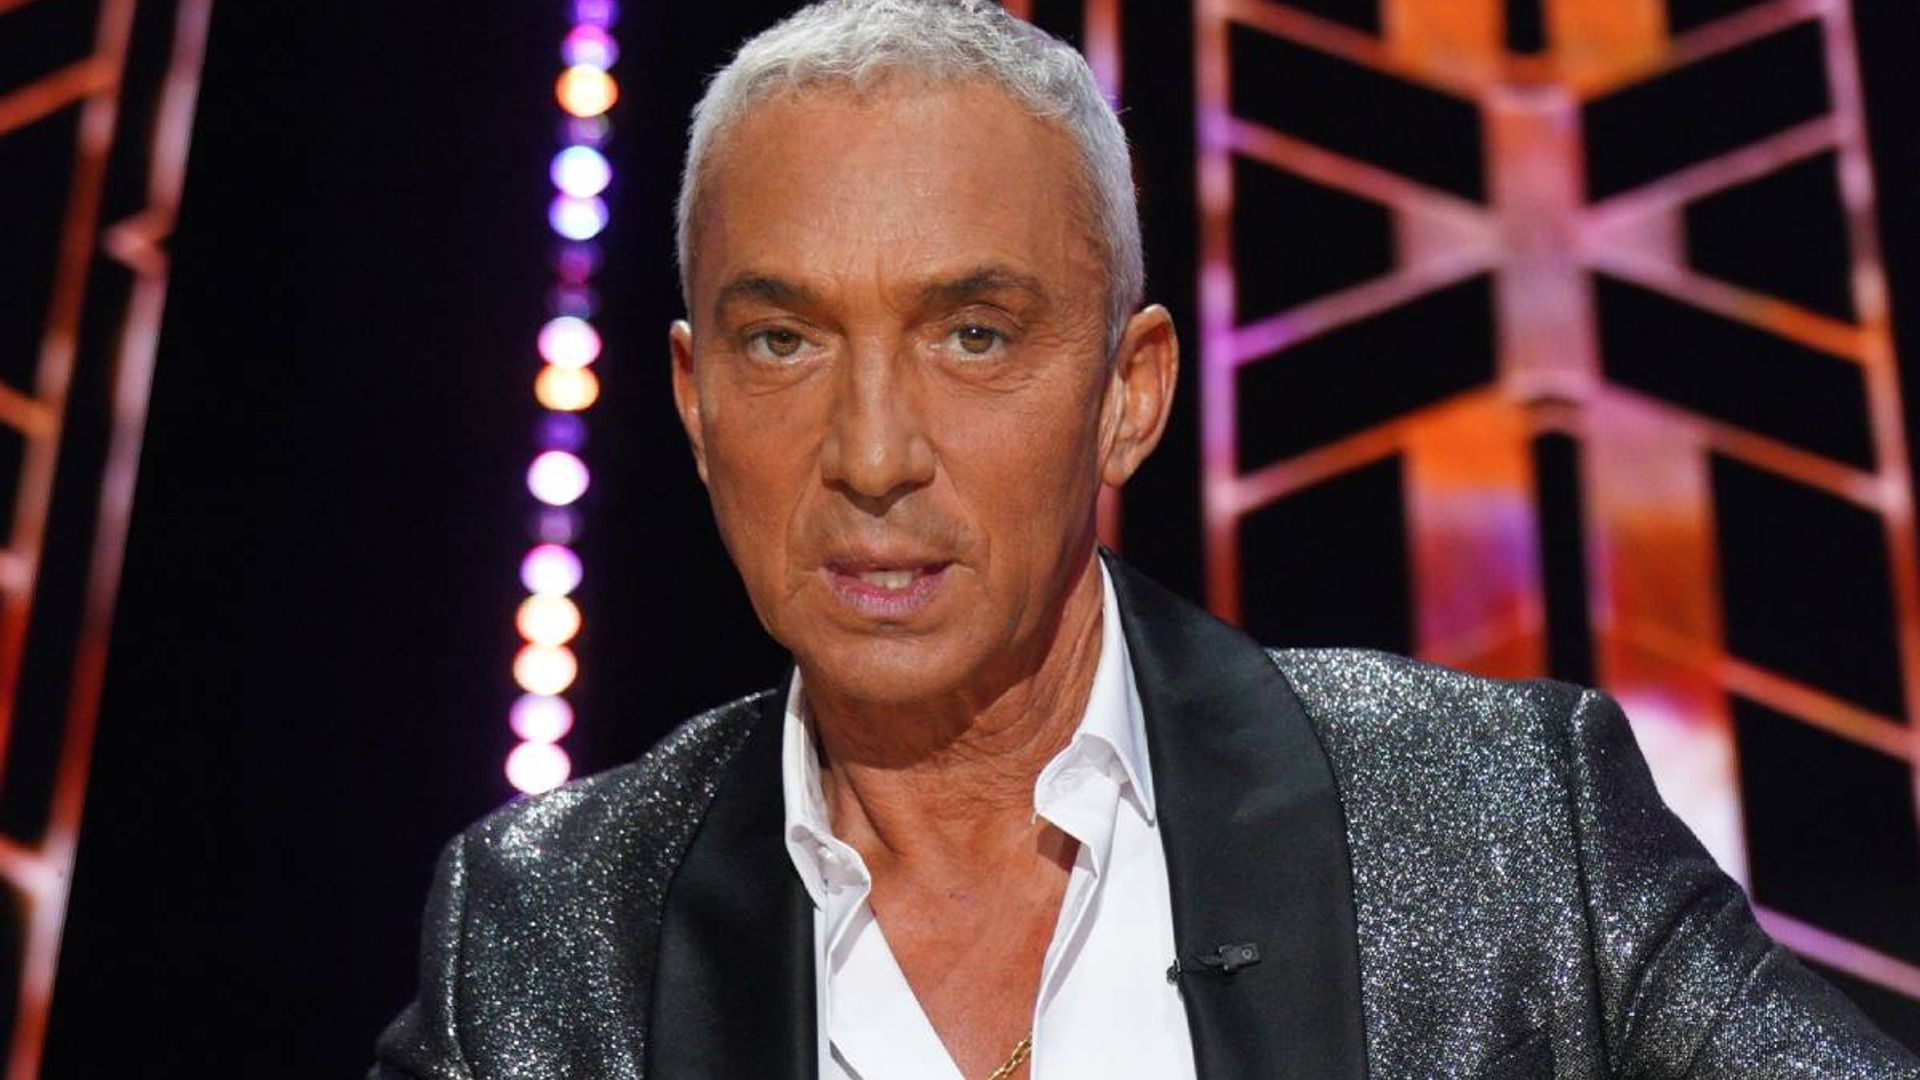 Bruno Tonioli makes personal comment during emotional moment in DWTS final